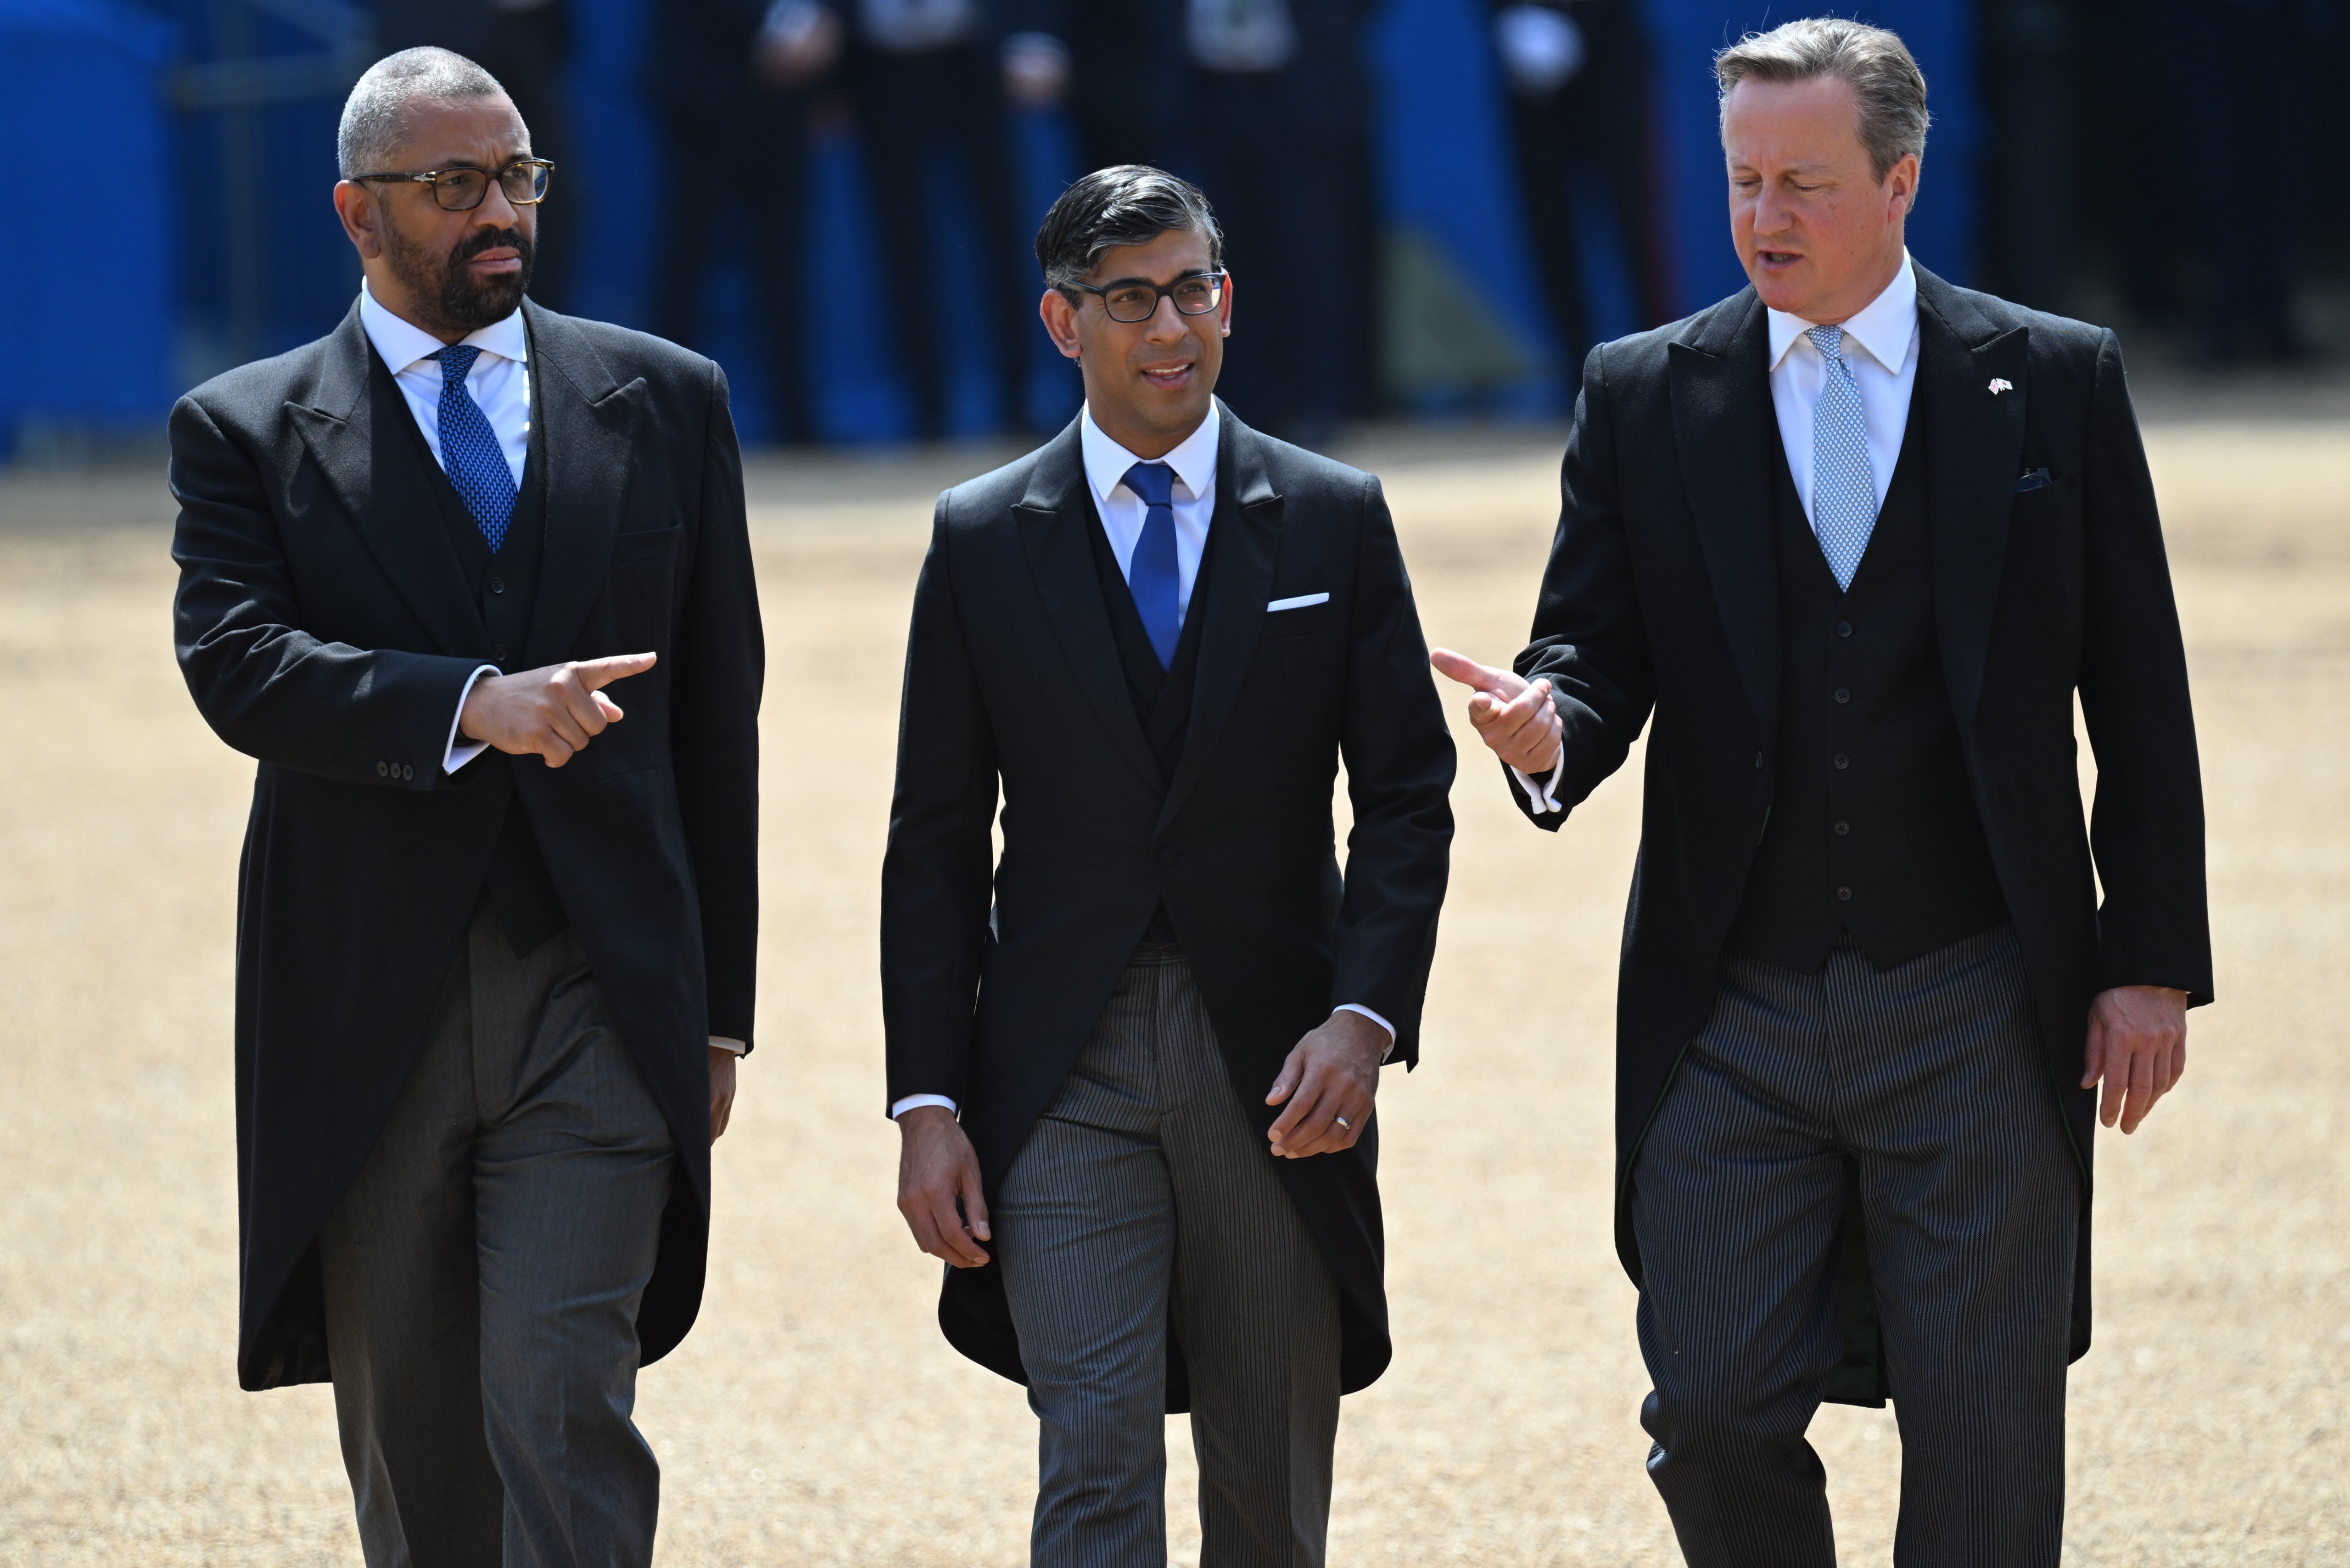 James Cleverly, Rishi Sunak and Lord Cameron at the ceremonial welcome at Horse Guards Parade, London, for the state visit of Emperor Naruhito and his wife Empress Masako of Japan (Eddie Mulholland/Daily Telegraph)